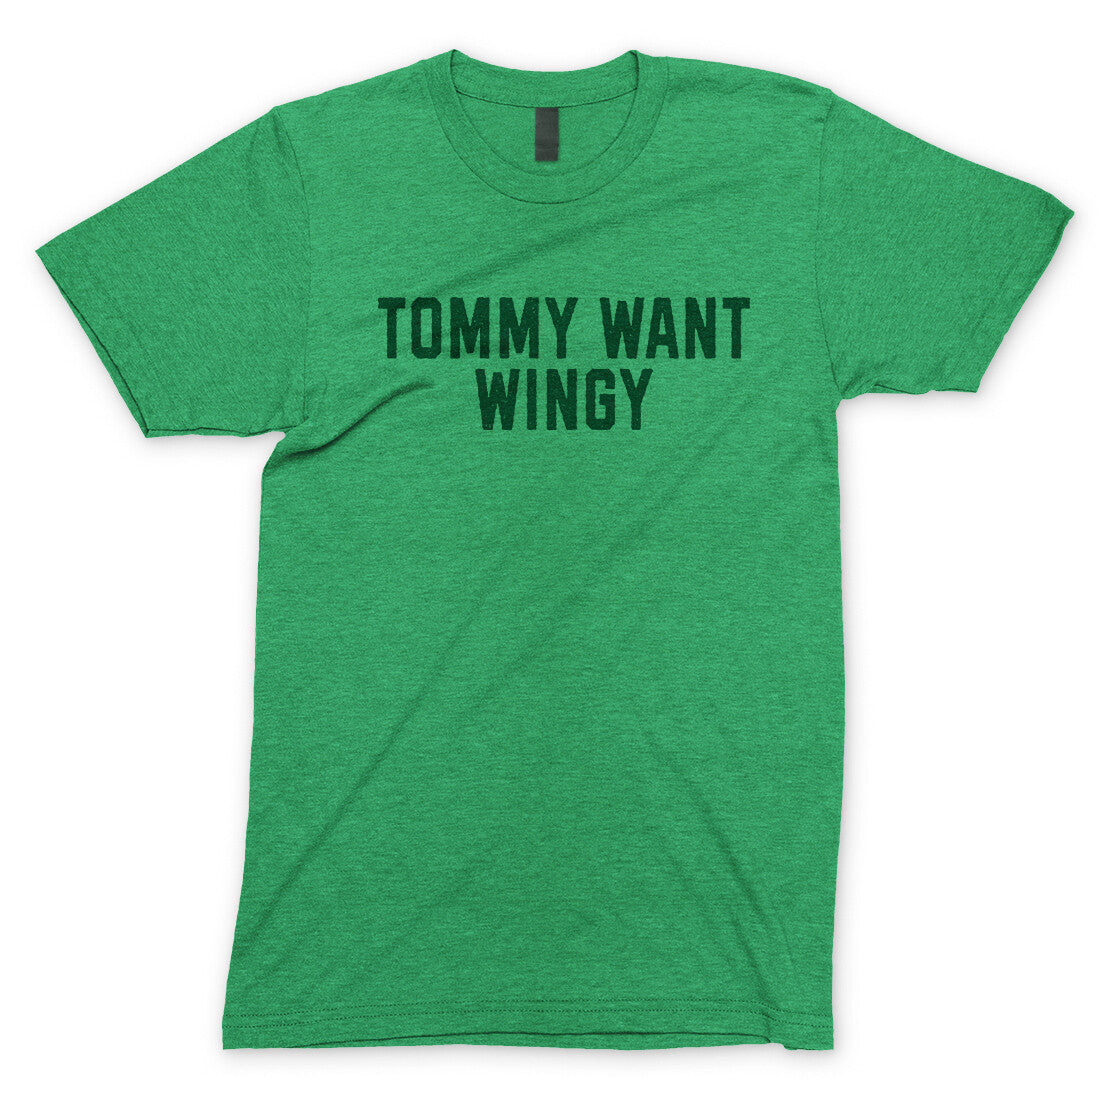 Tommy Want Wingy in Heather Irish Green Color